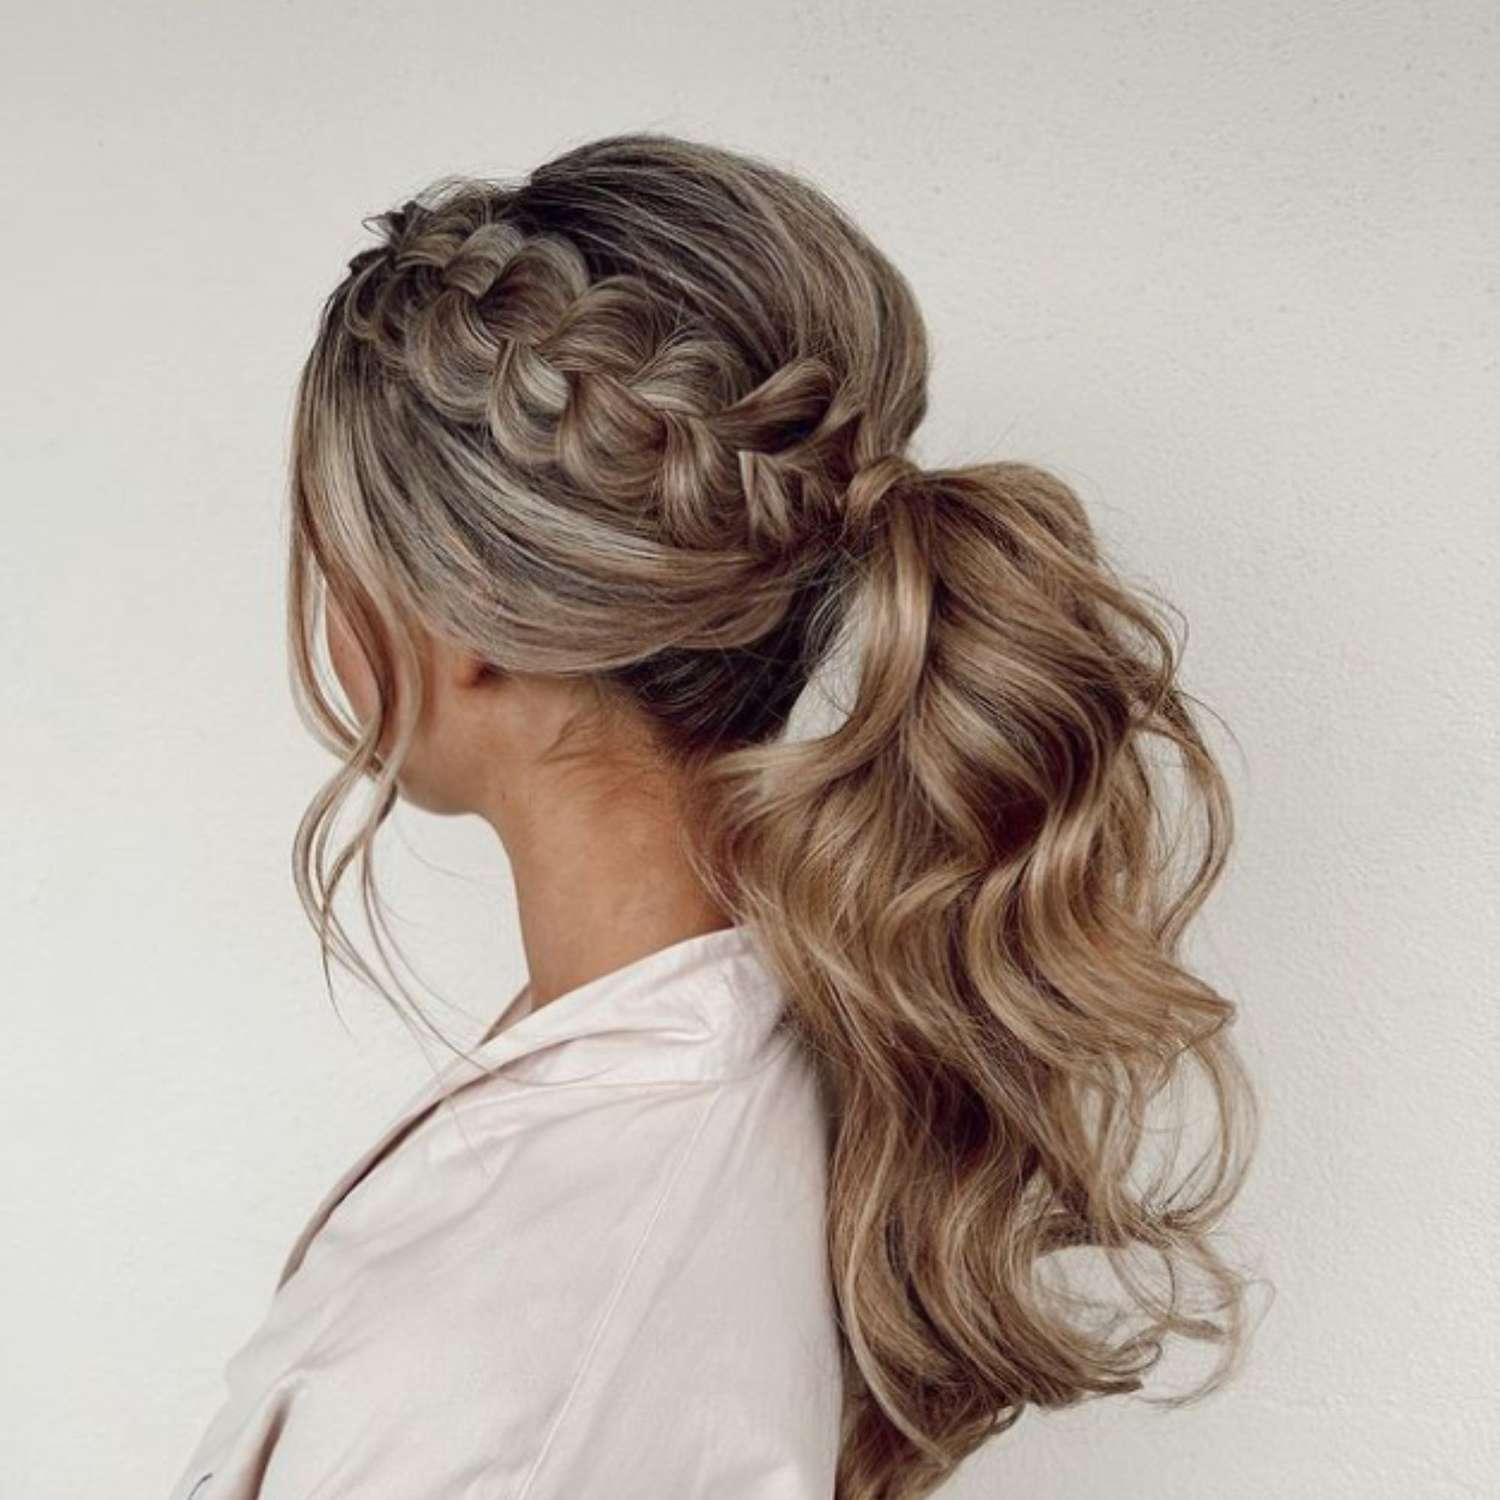 Voluminous ponytail with a side braid.